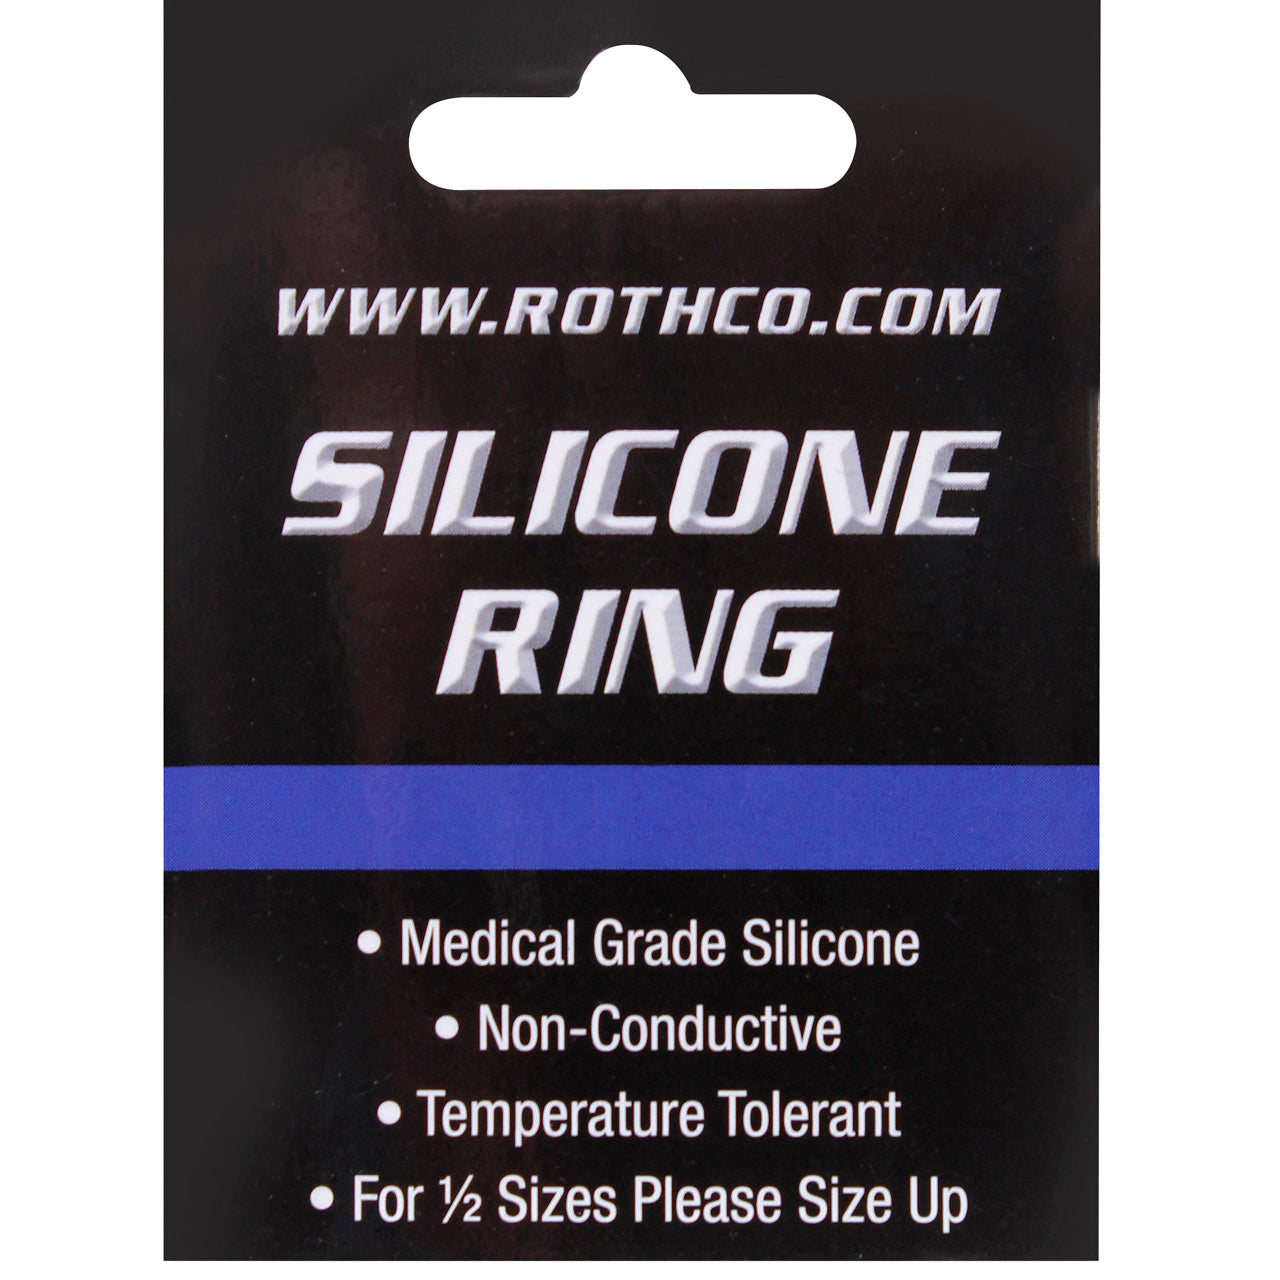 Perfect Silicone Ring Gift for Electricians | Knot Theory